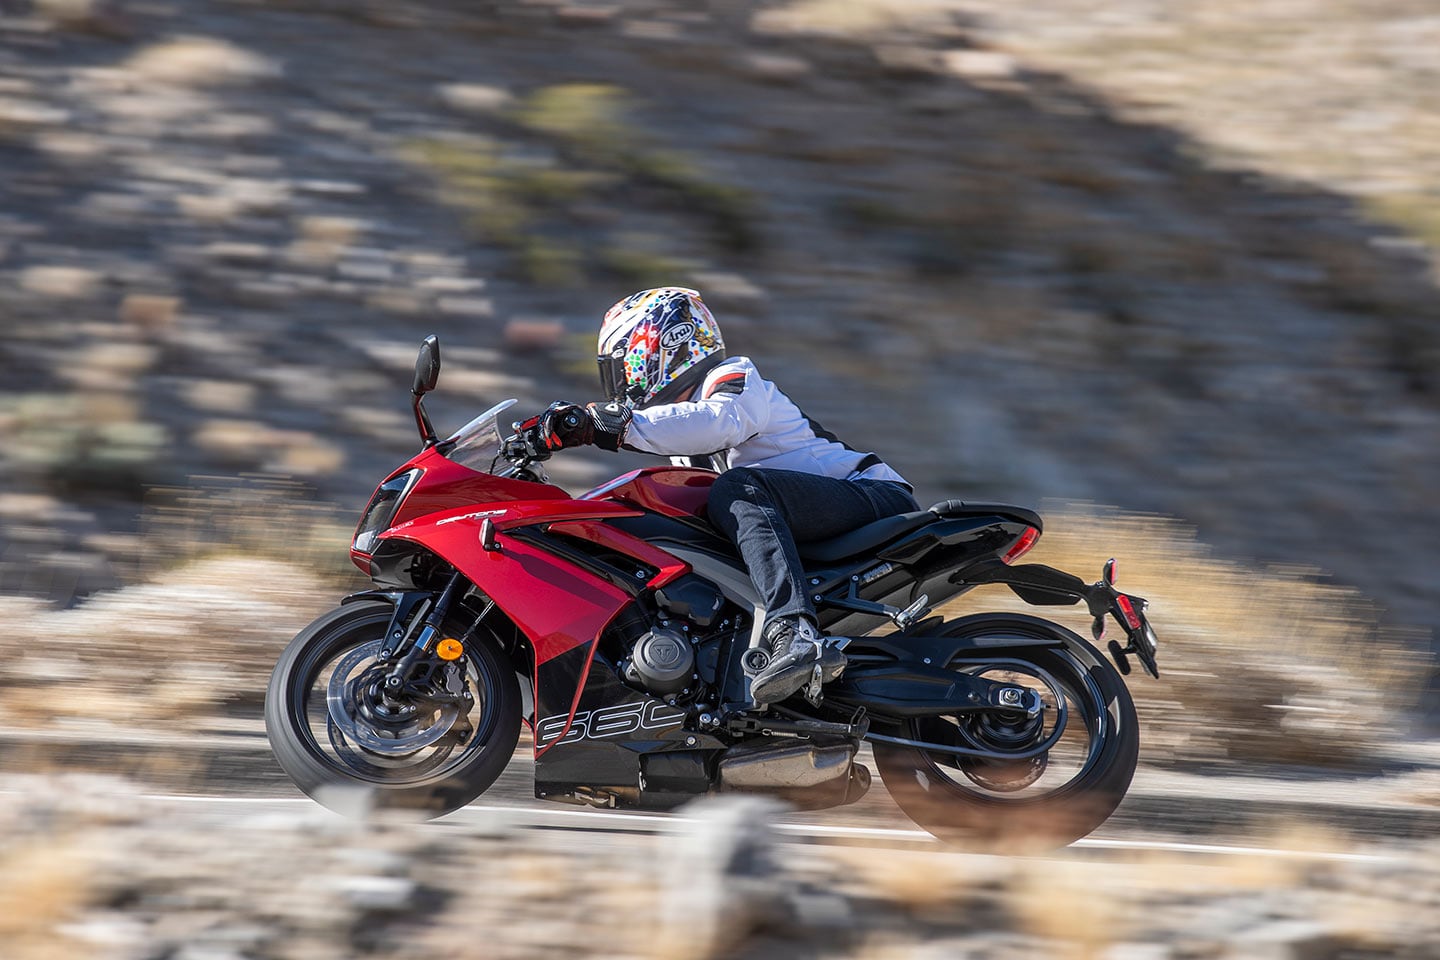 The Daytona 660’s riding position is right in between the other two bikes with mid-height bars, rearset footpegs, and a comfortable seat.